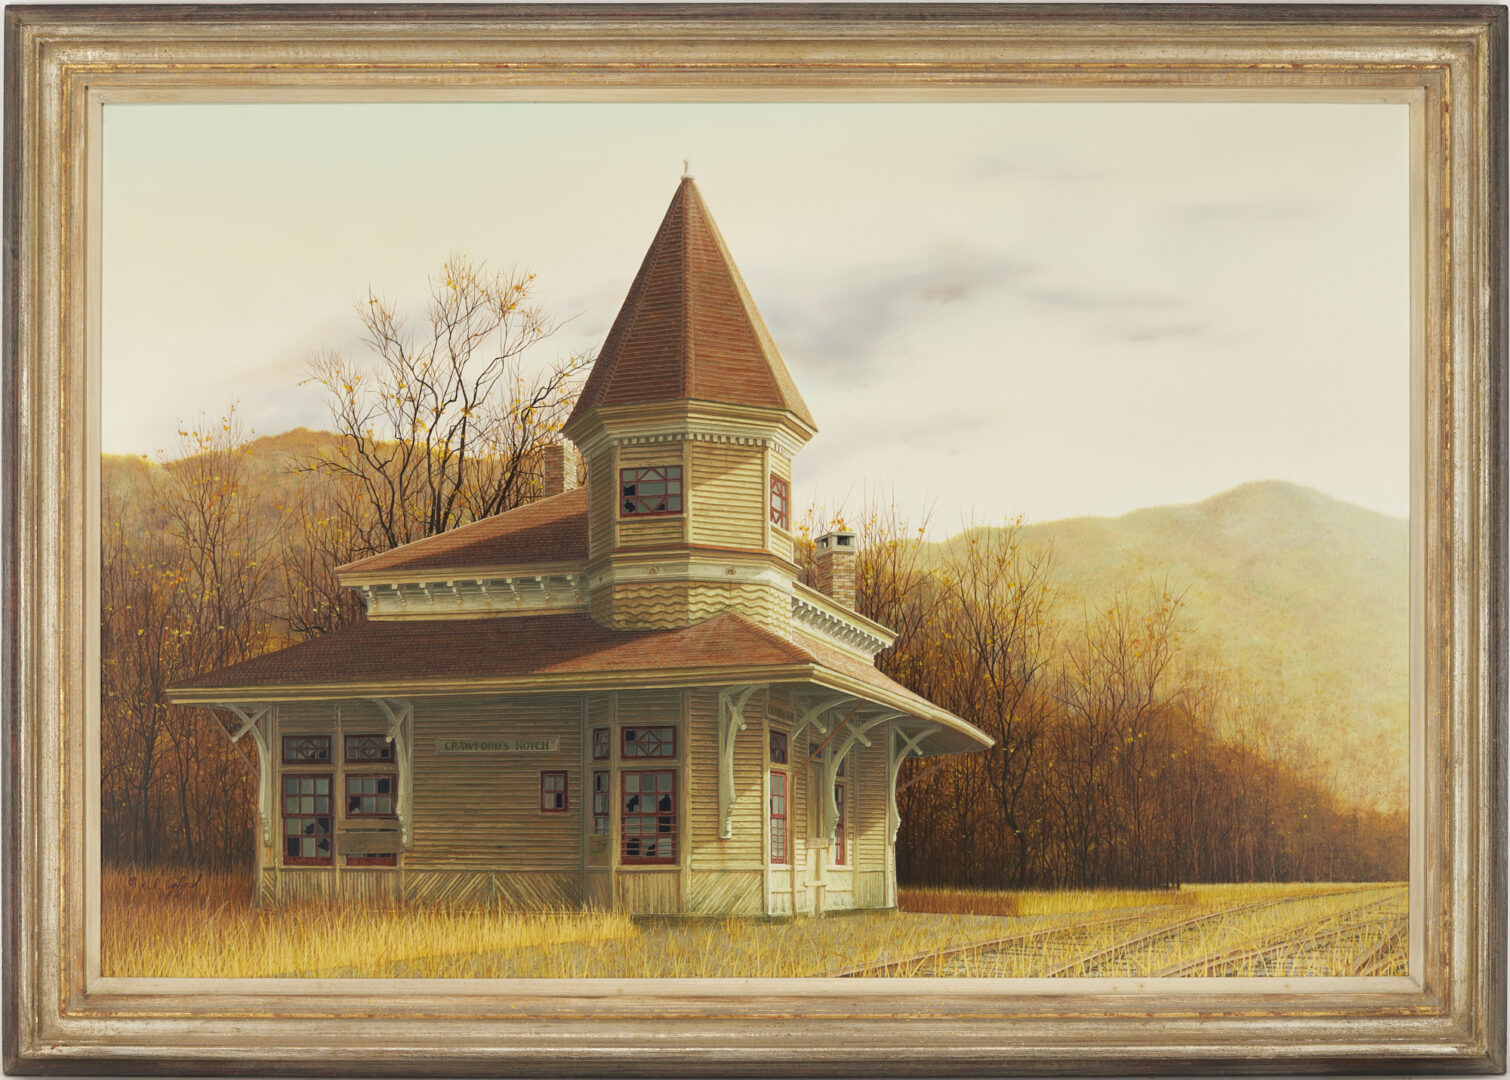 Lot 322: Douglas Gifford Oil Painting, Crawford's Notch Train Station, New Hampshire